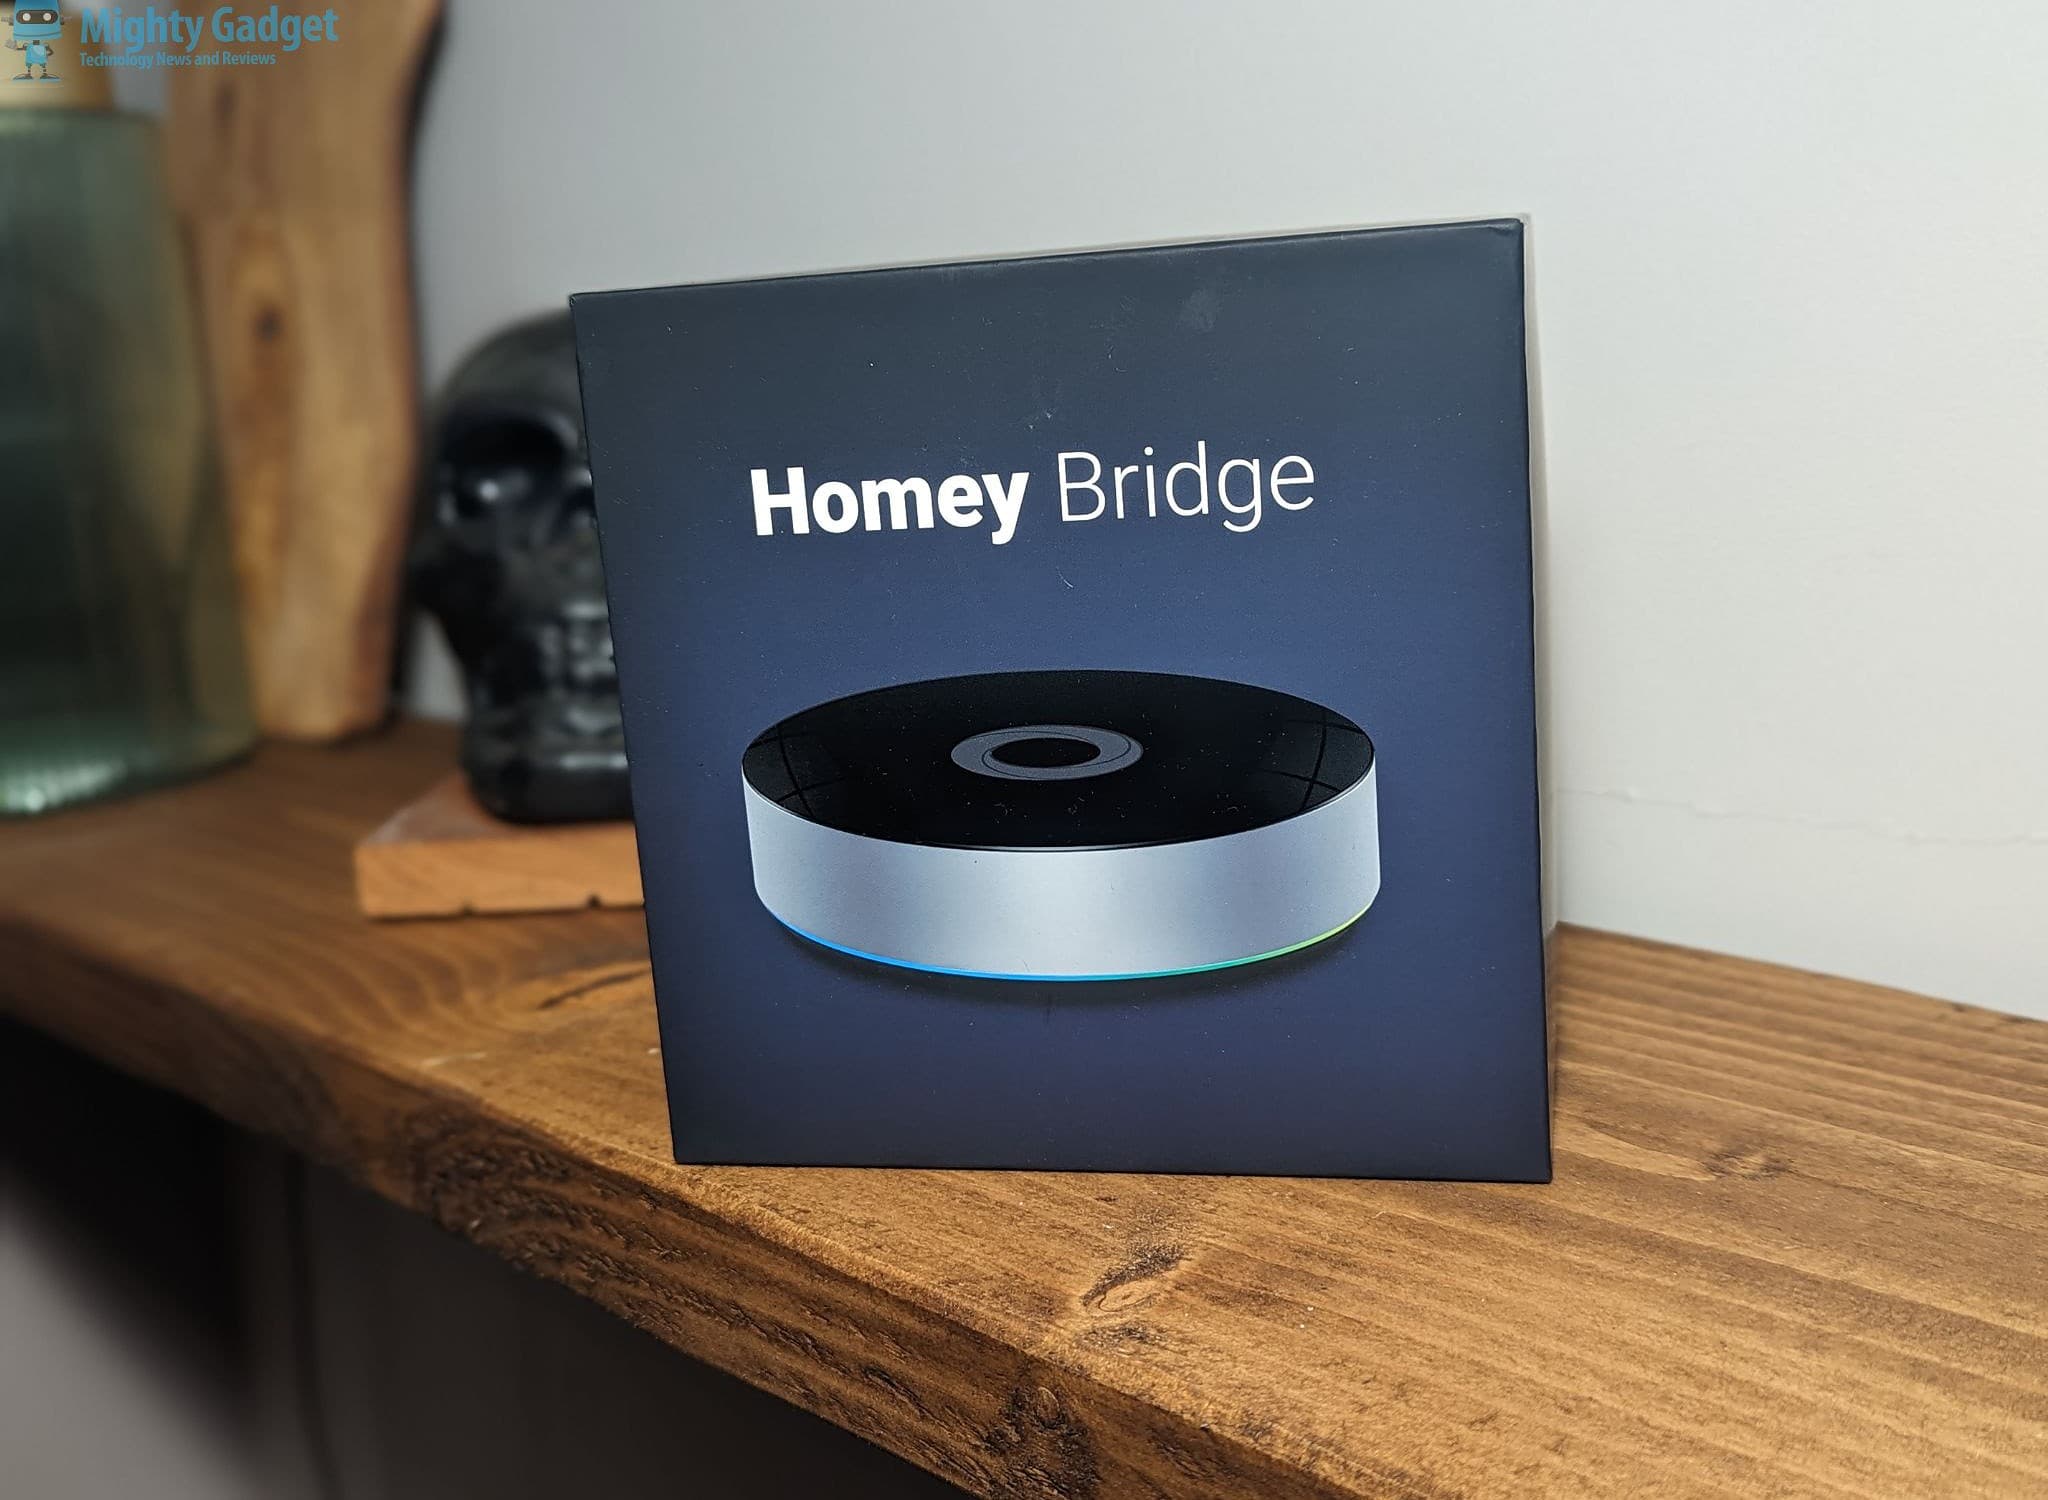 Homey Bridge Review by Mighty Gadget